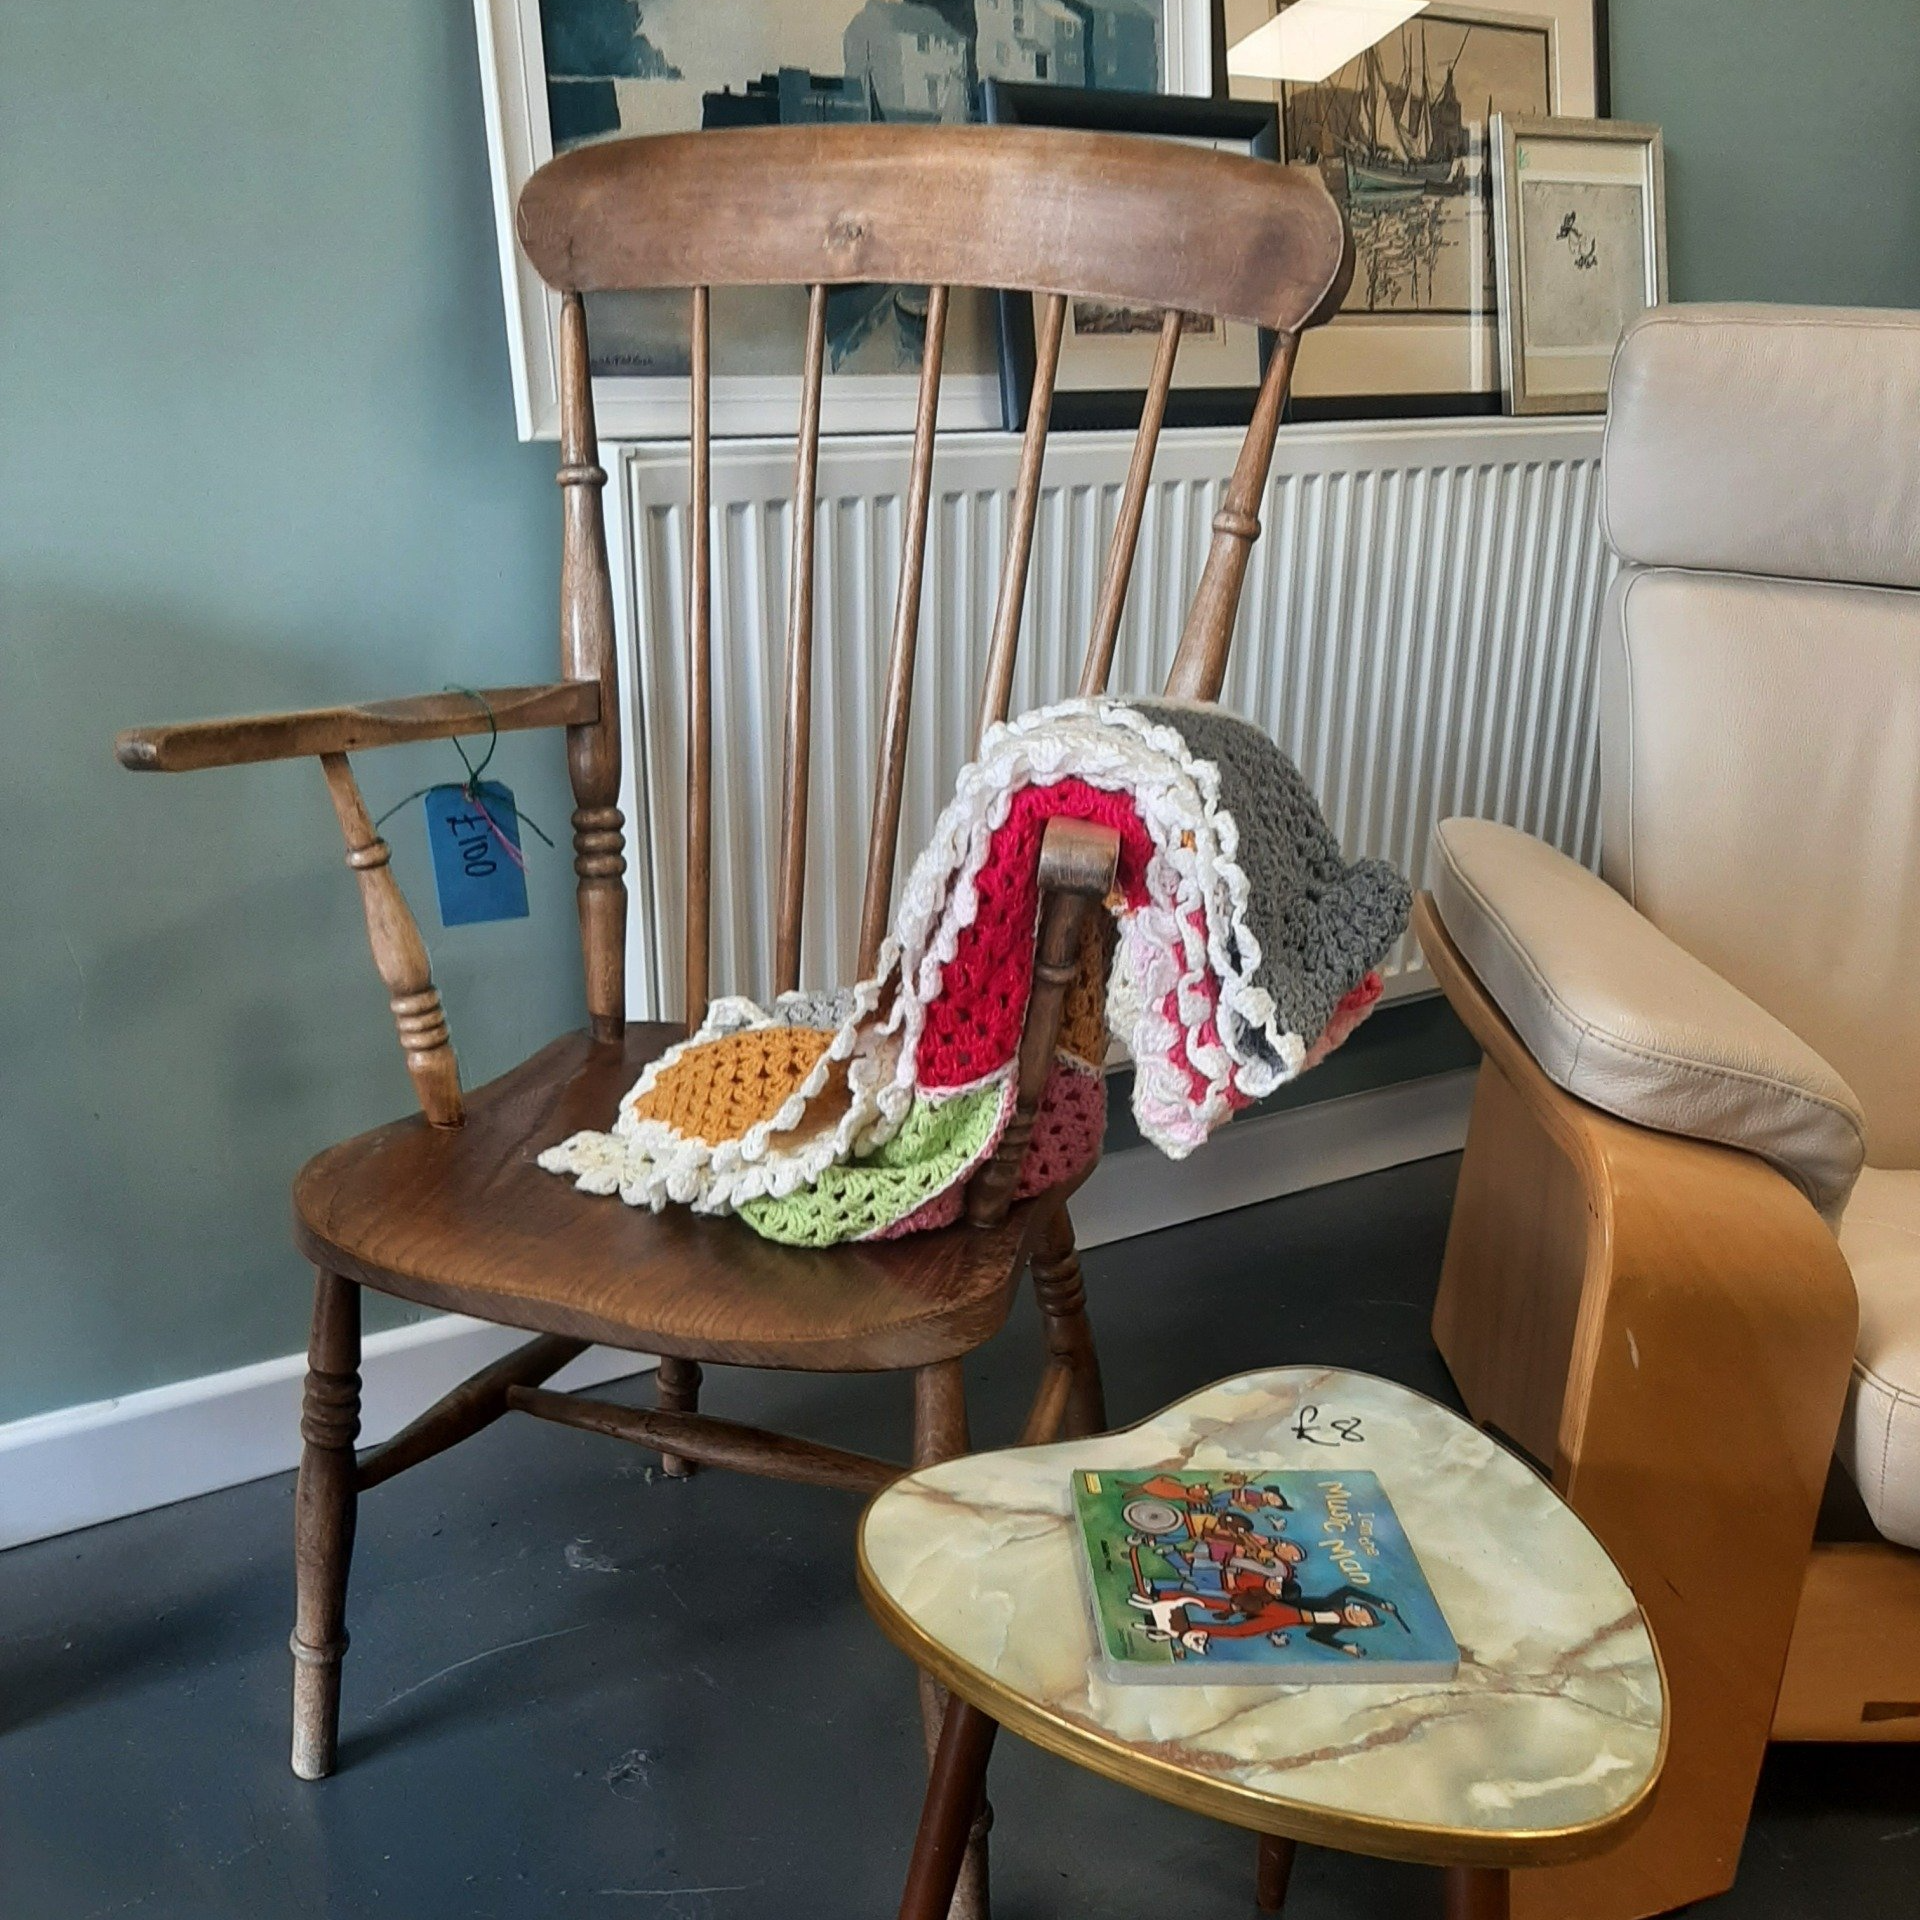 An image of a carver chair and vintage items